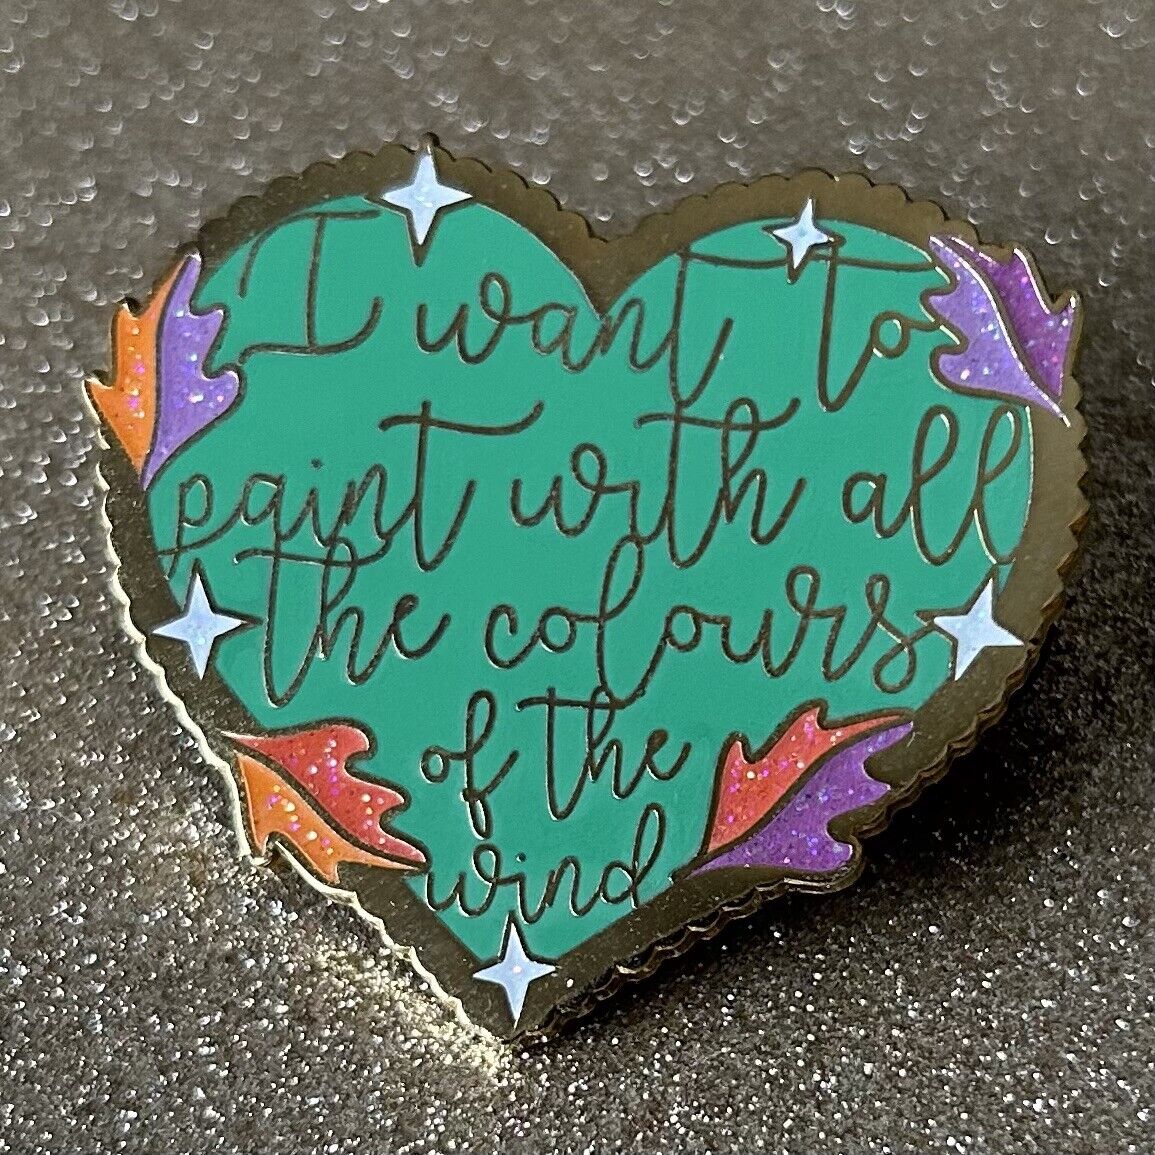 Pocahontas Paint With All The Colors Of The Wind Quote Fantasy Pin